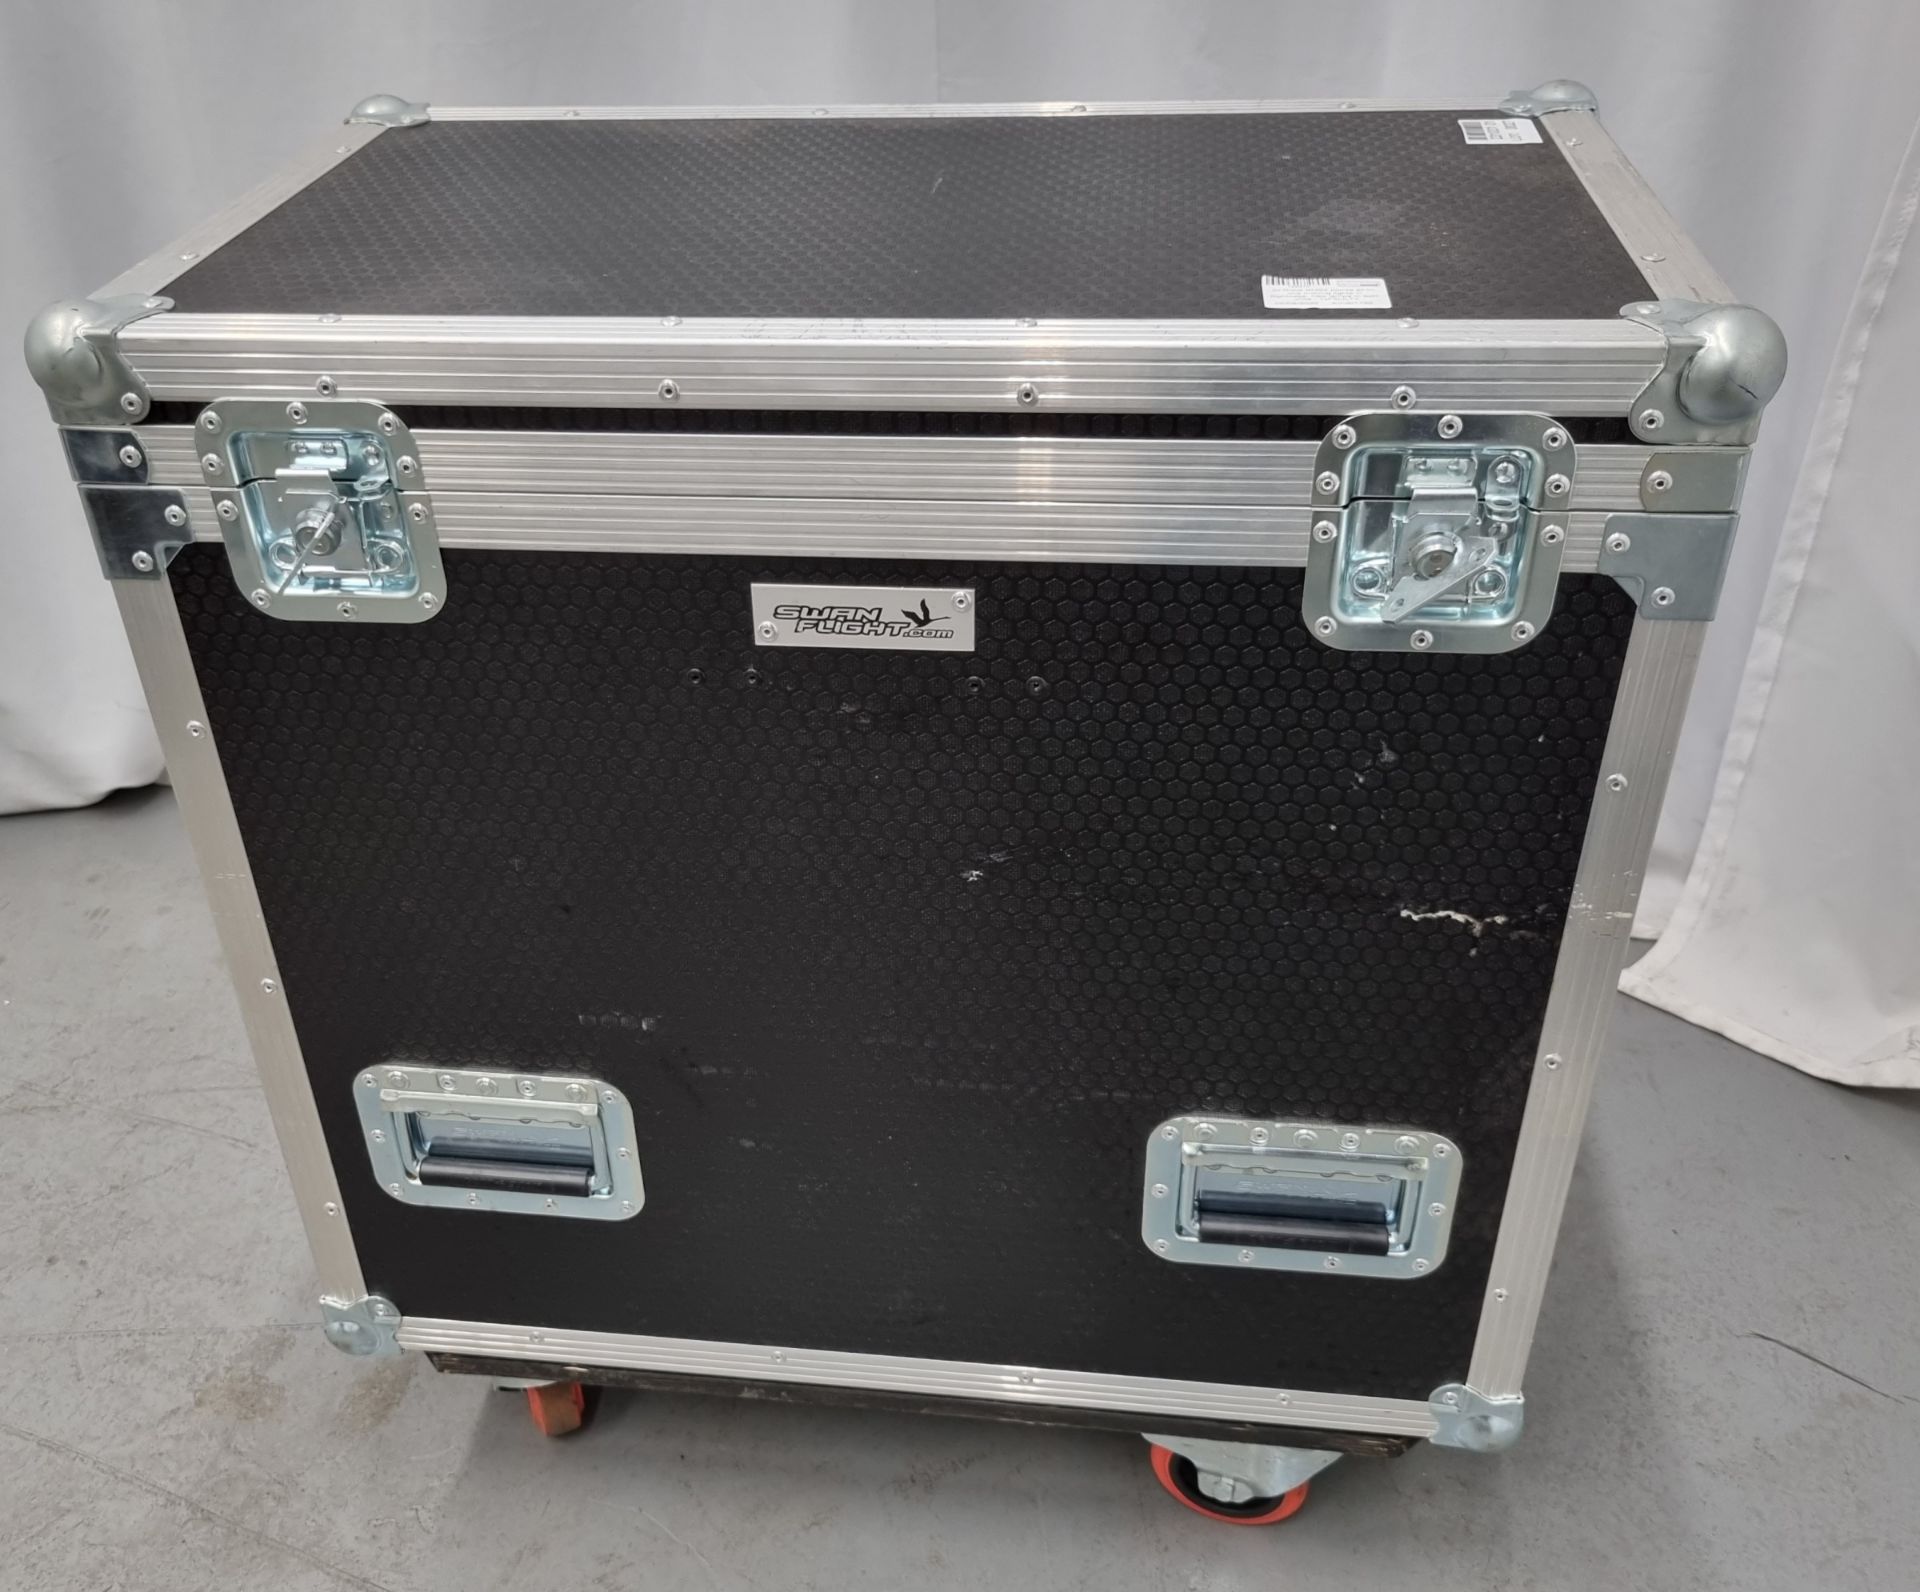 2x Robe RNS2 pointe all-in-one moving lights in flight case, new lamps in both units - 1 FAULTY - Image 11 of 11